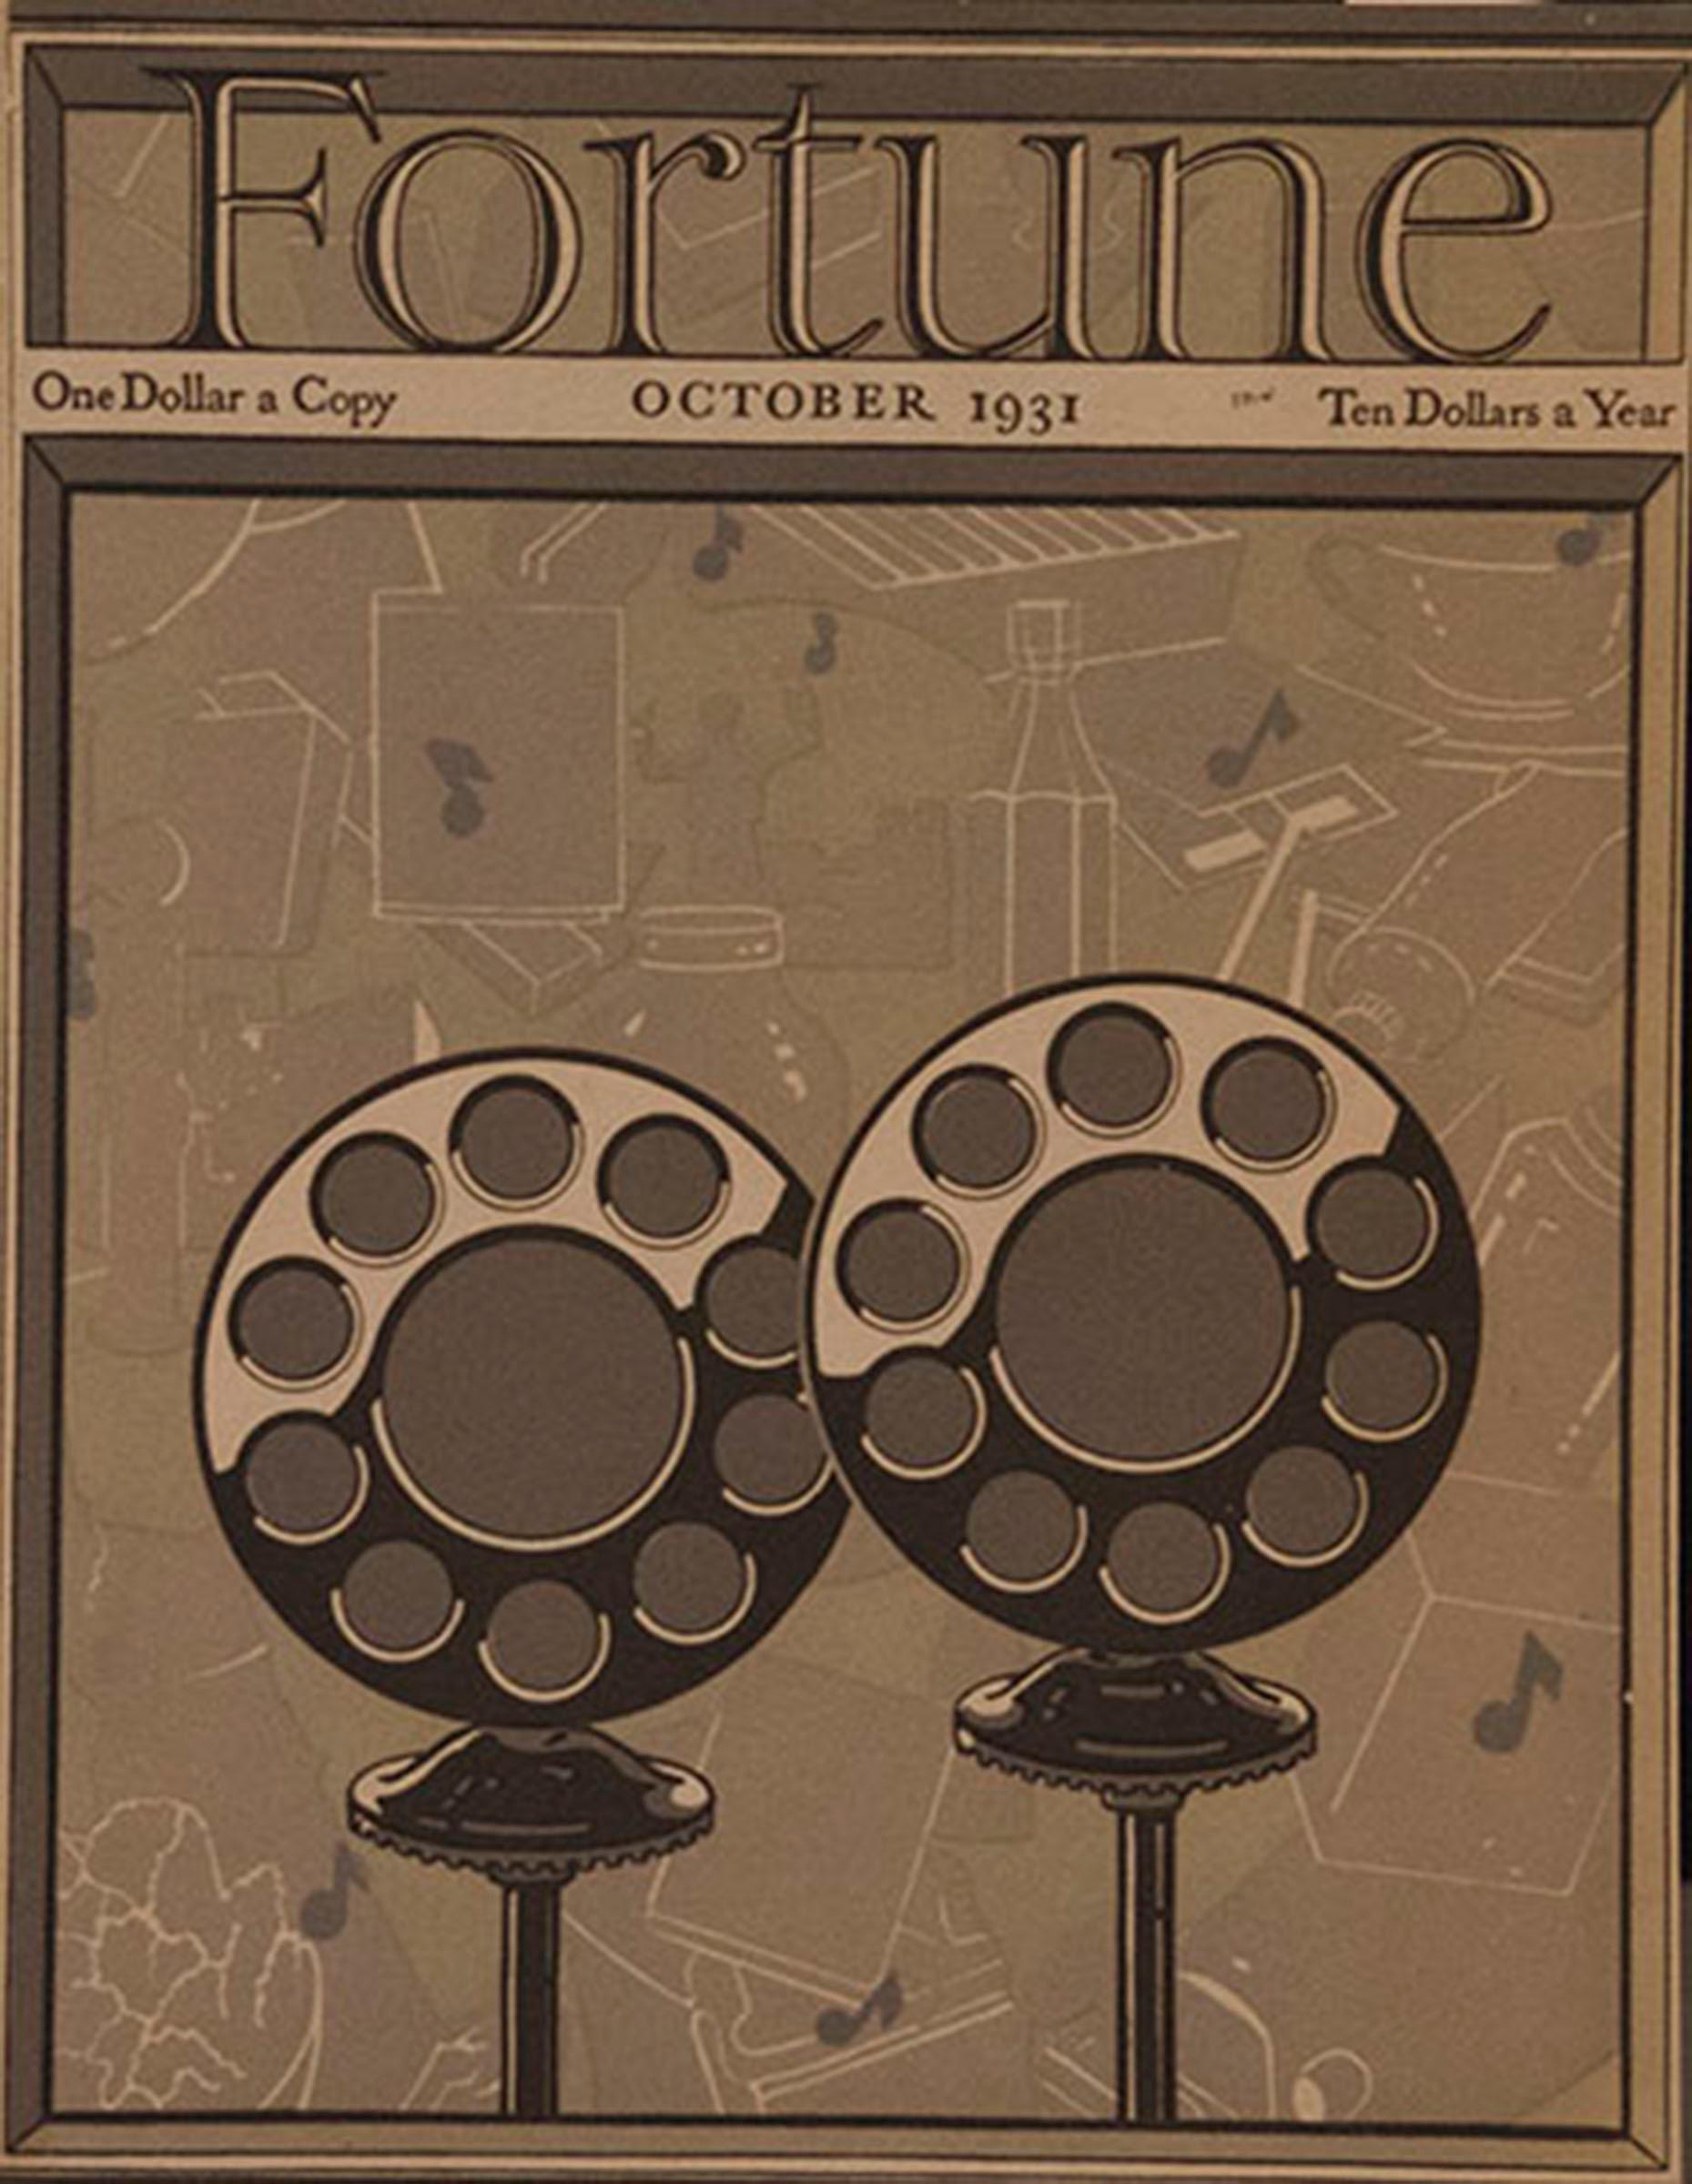 A Collection of 65 Original Fortune Magazine Covers 1931-1940 - Brown Figurative Print by Unknown